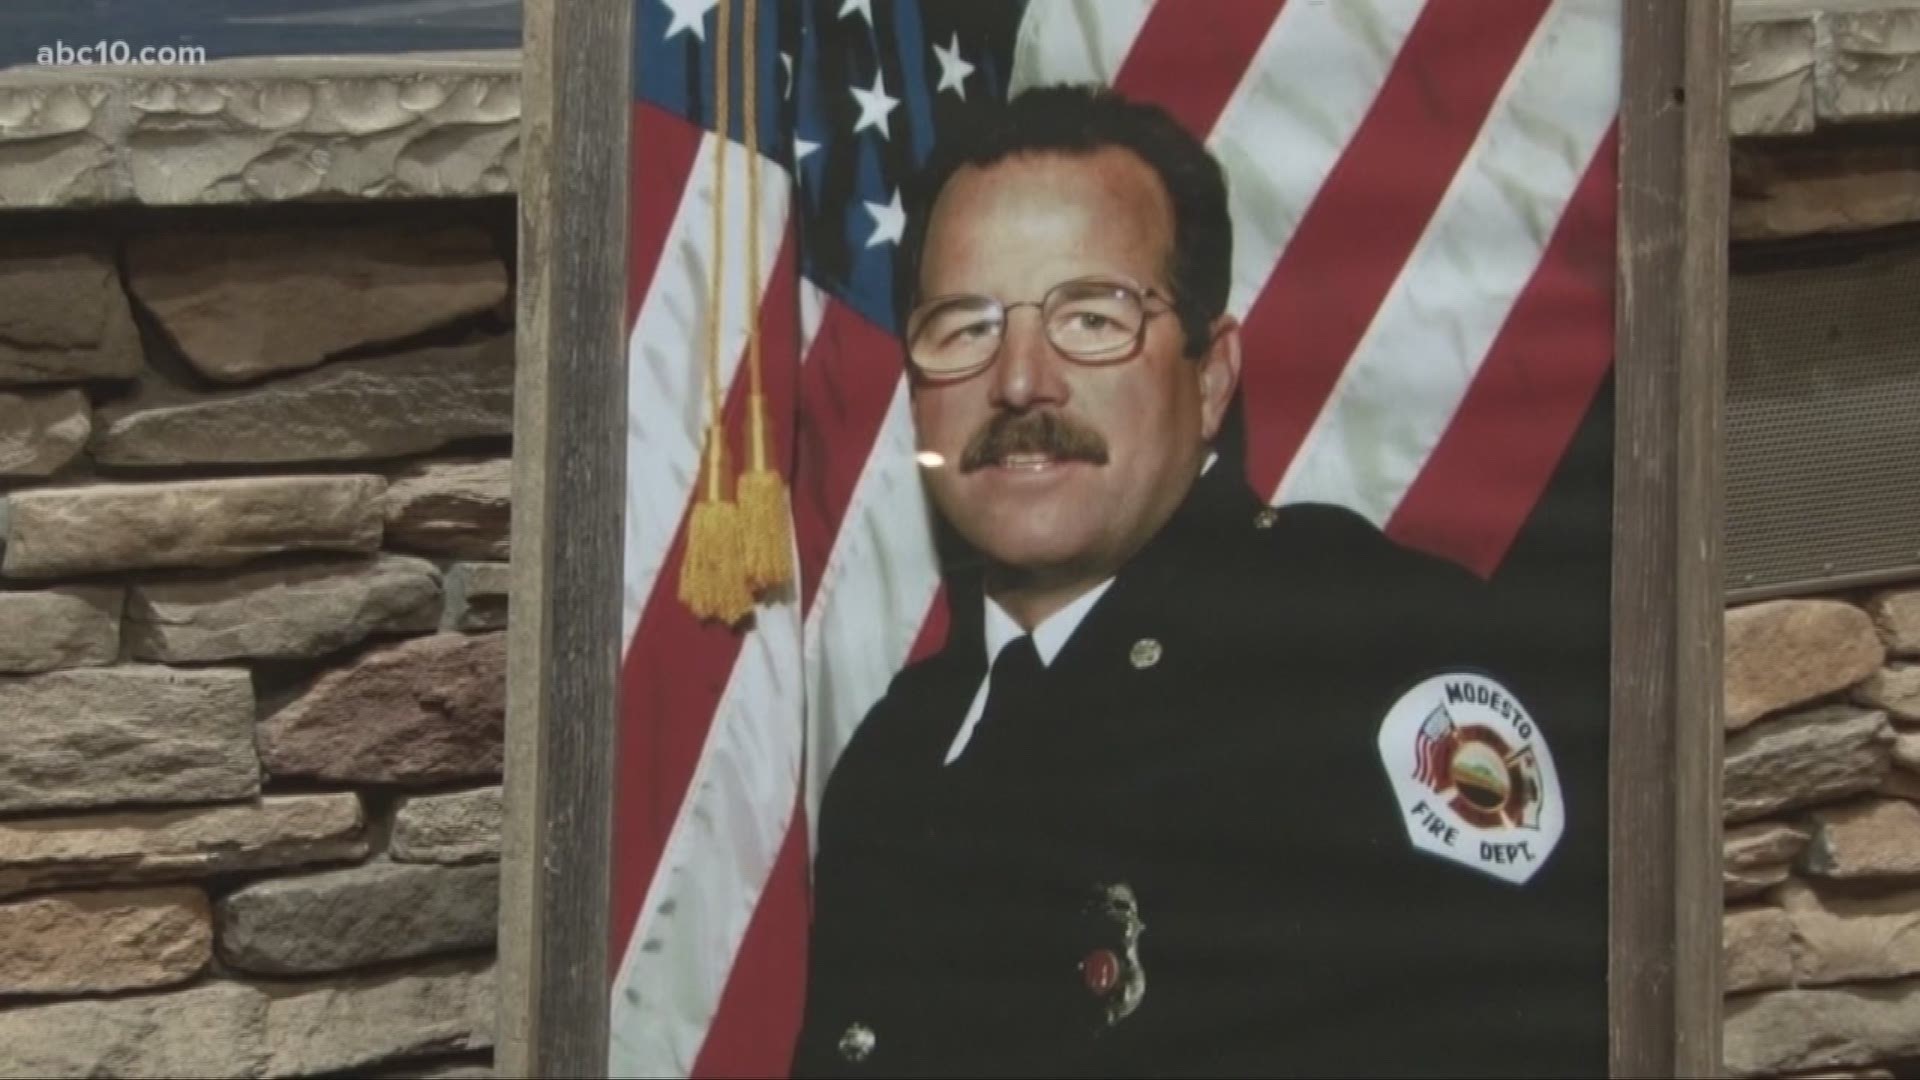 Community members gathered to remember fallen firefighter Captain Greg Ewert on Tuesday.